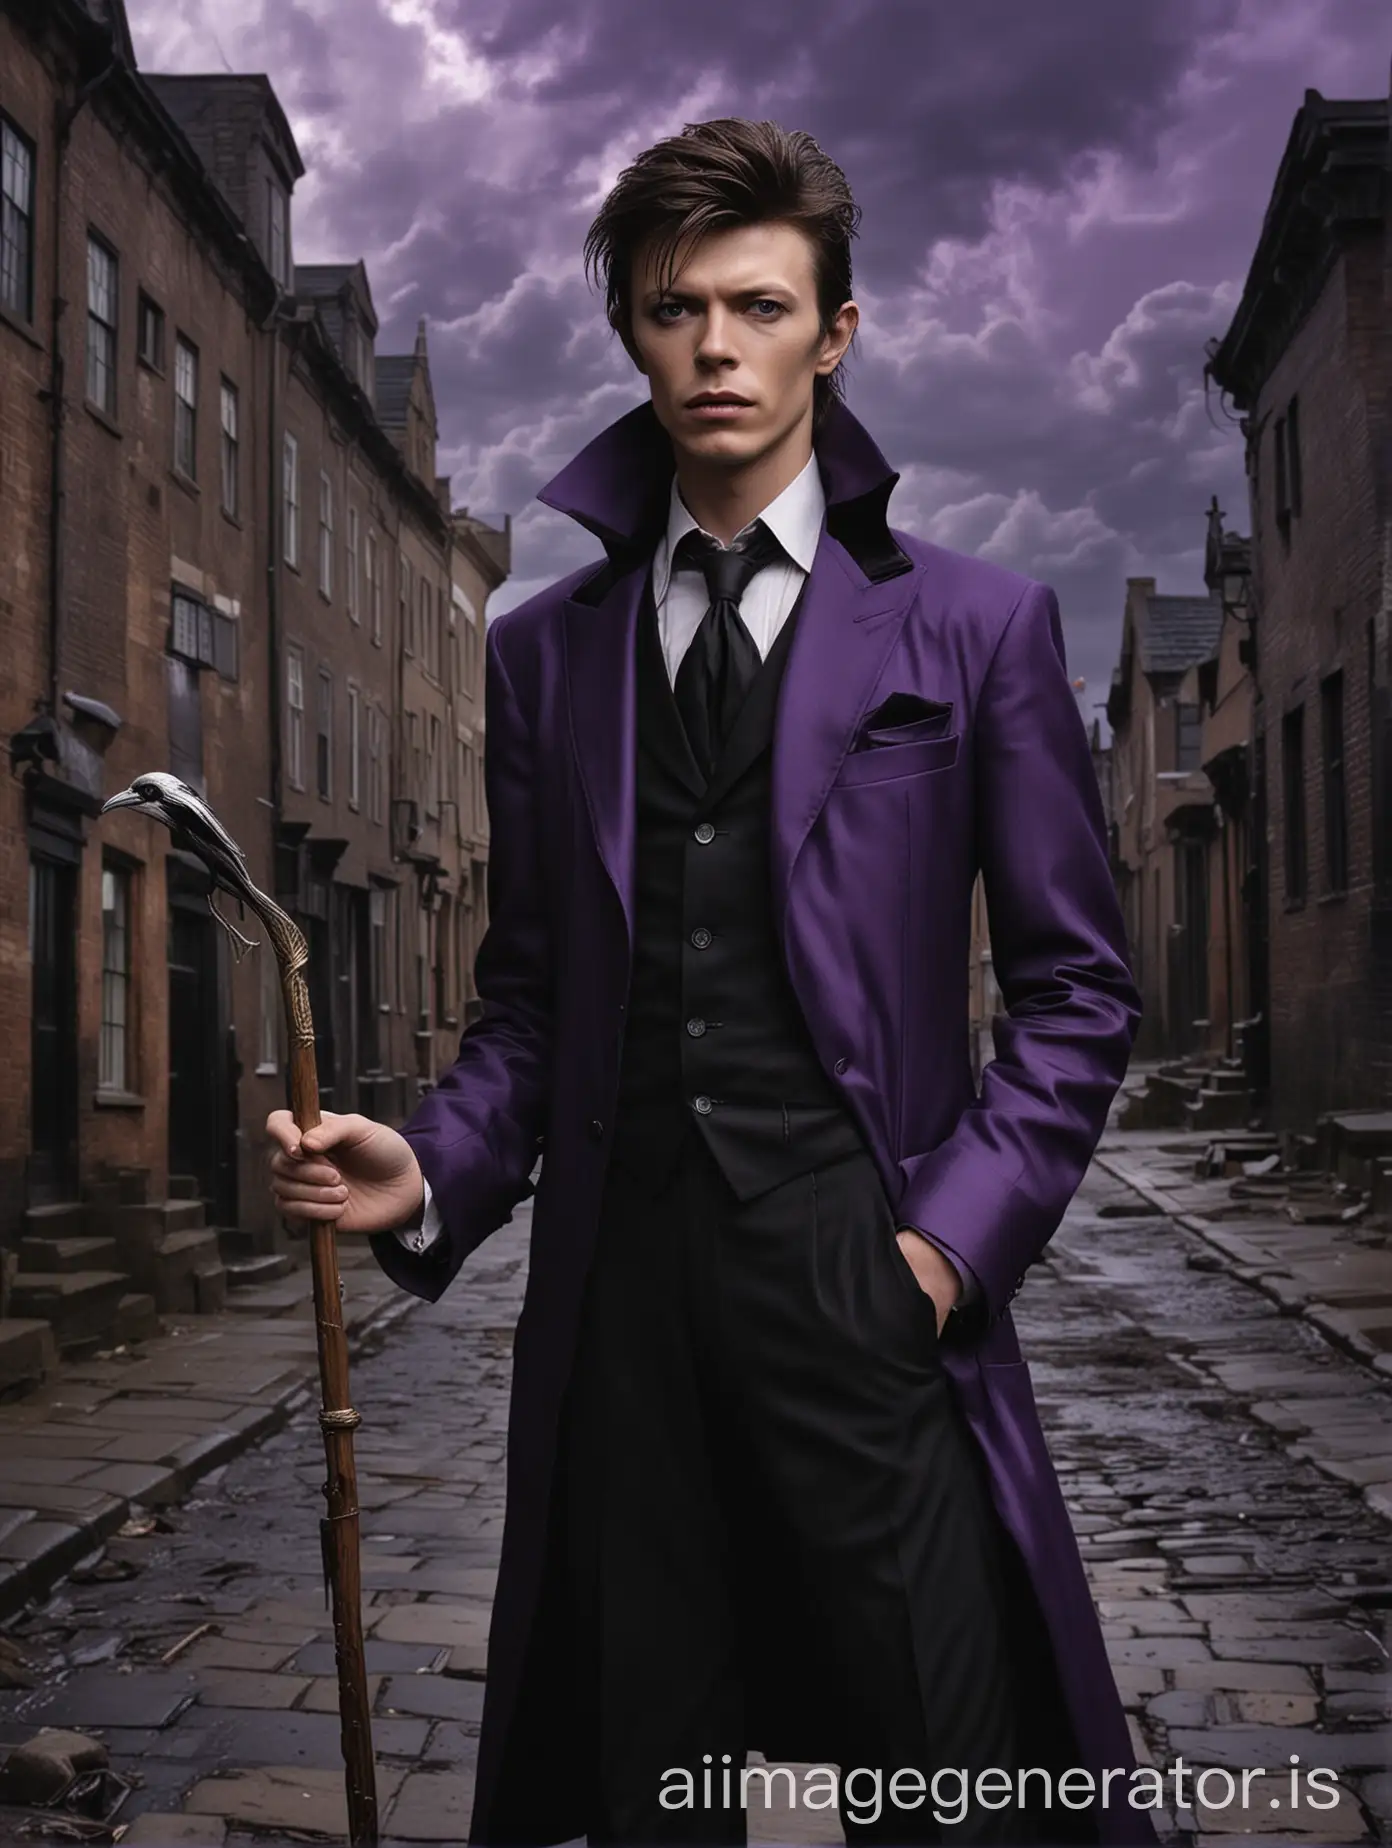 david bowie face in his early 20s, slender young man with black hair, man holding a gentleman's cane with a silver-crow-shaped handle, man wearing black three-piece suit with purple vest, midnight background with stormy clouds, old city background, wooden buildings